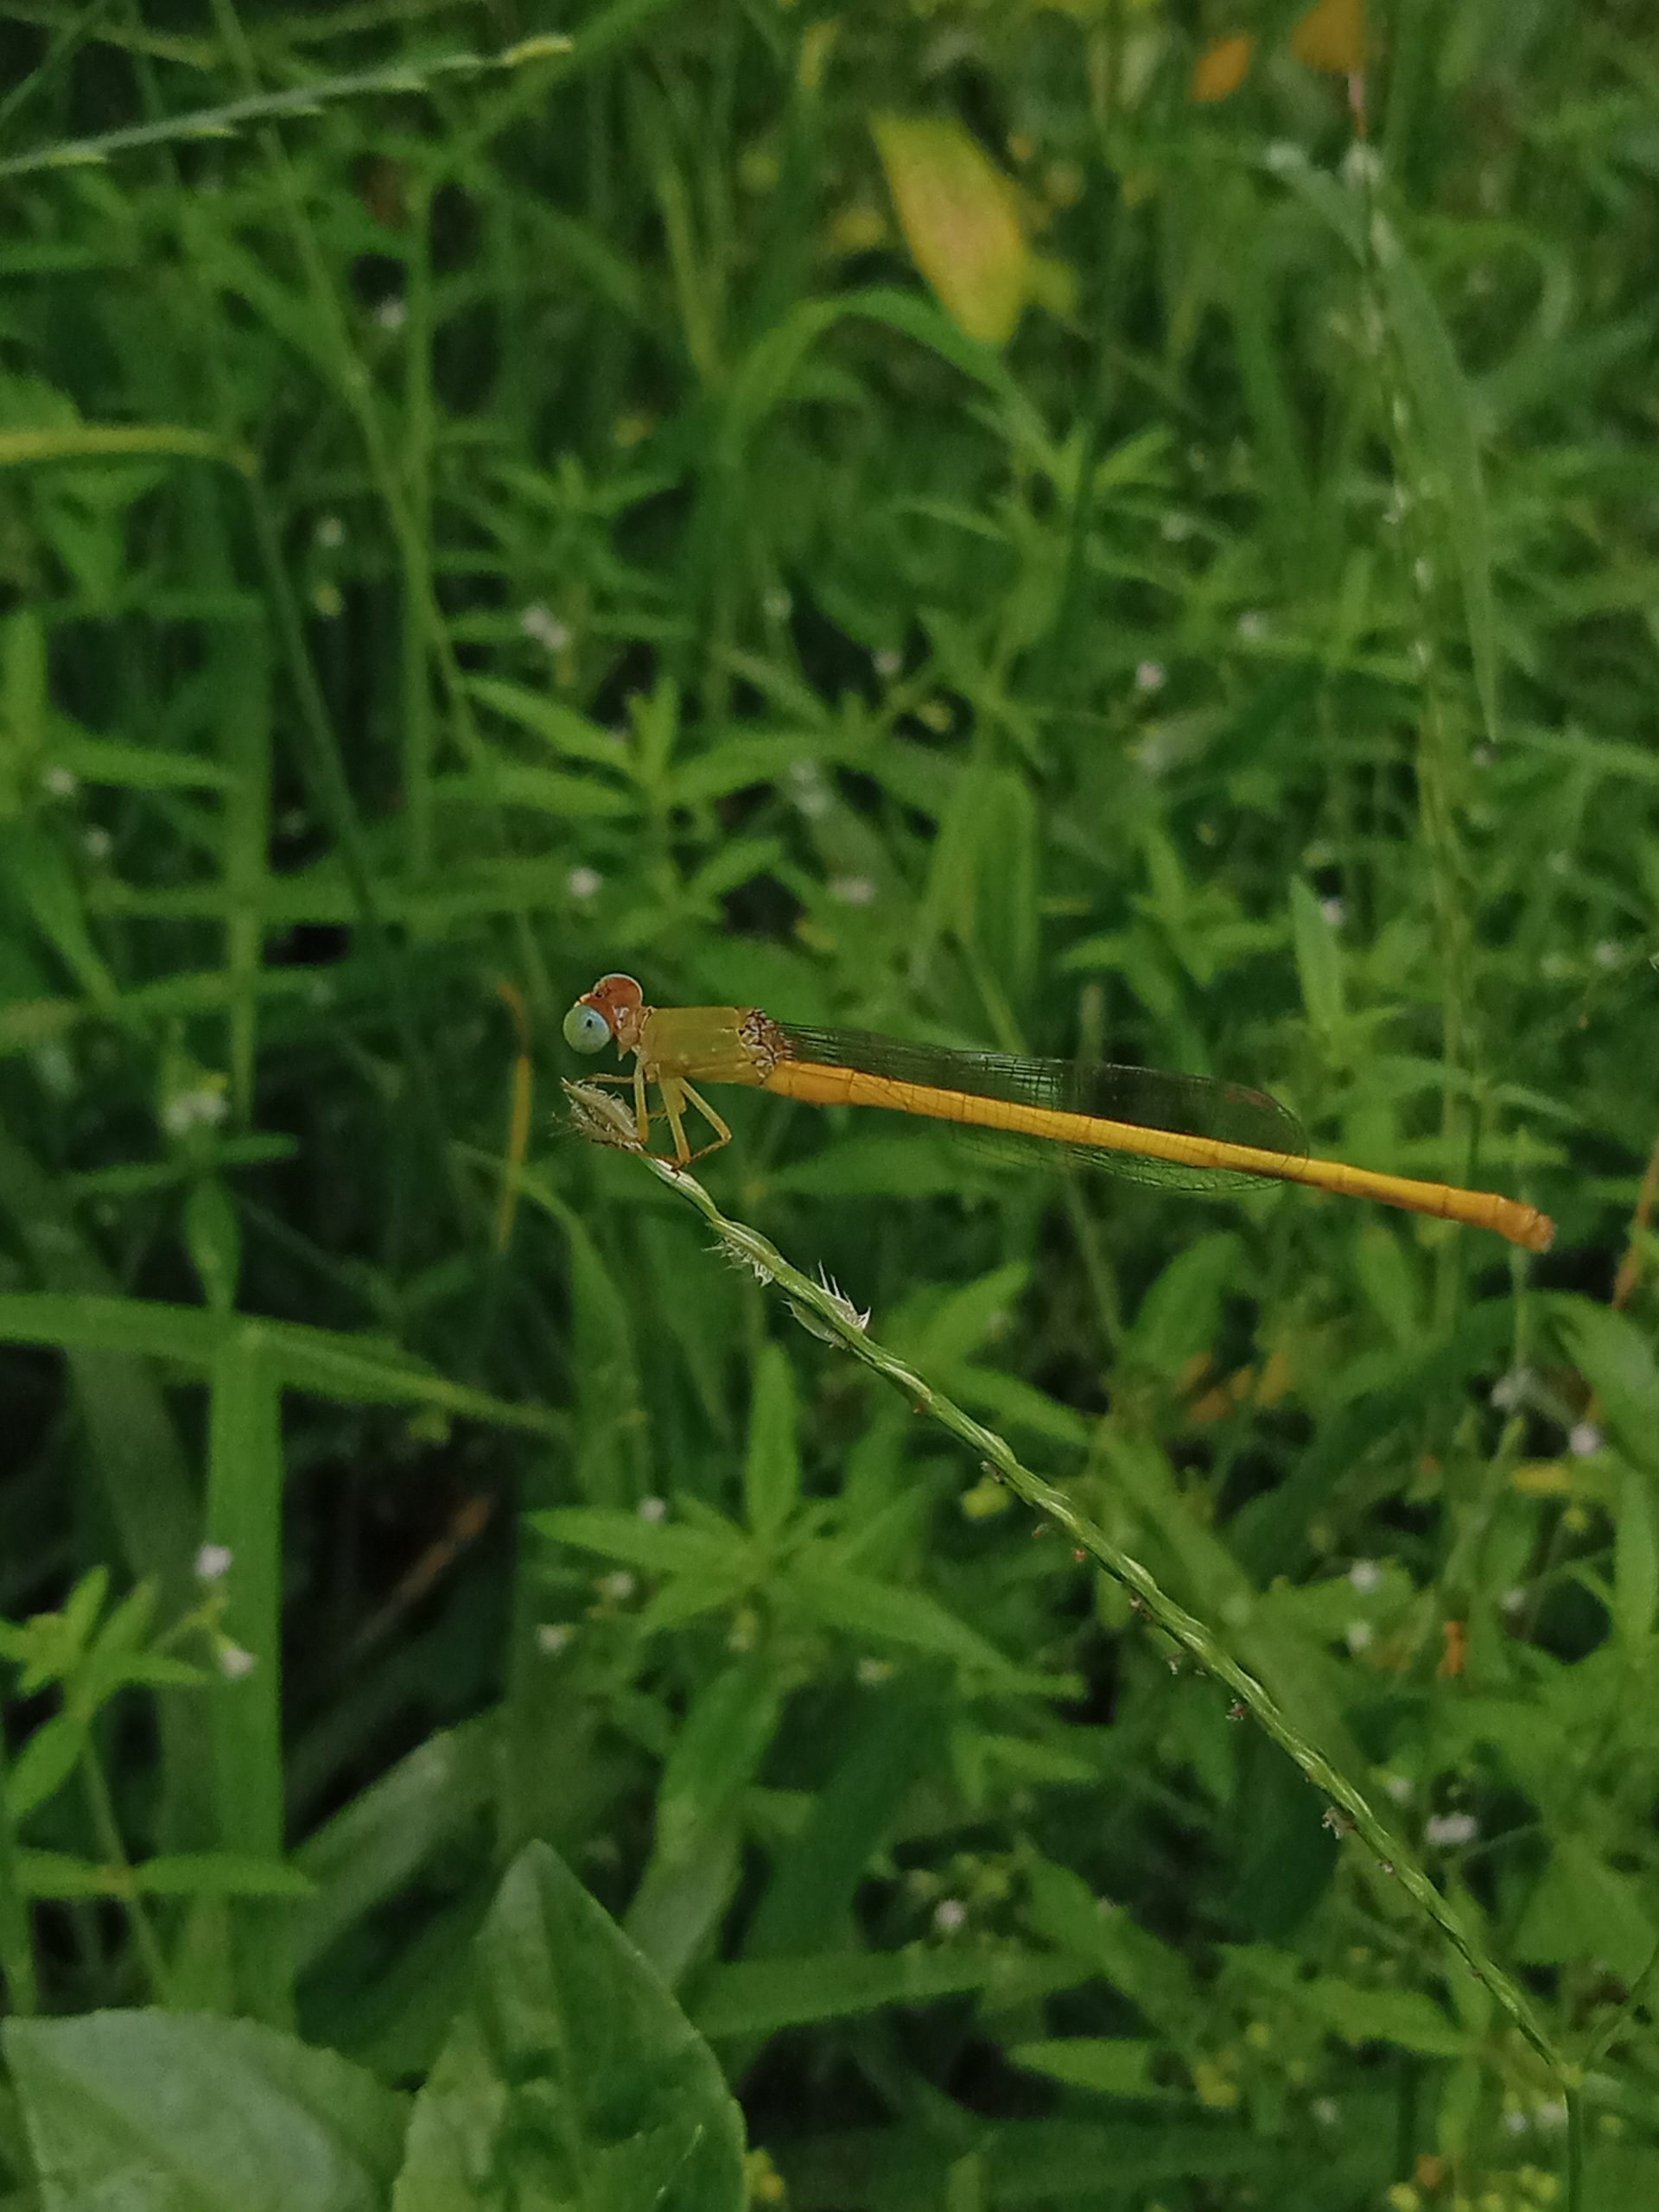 insect on grass